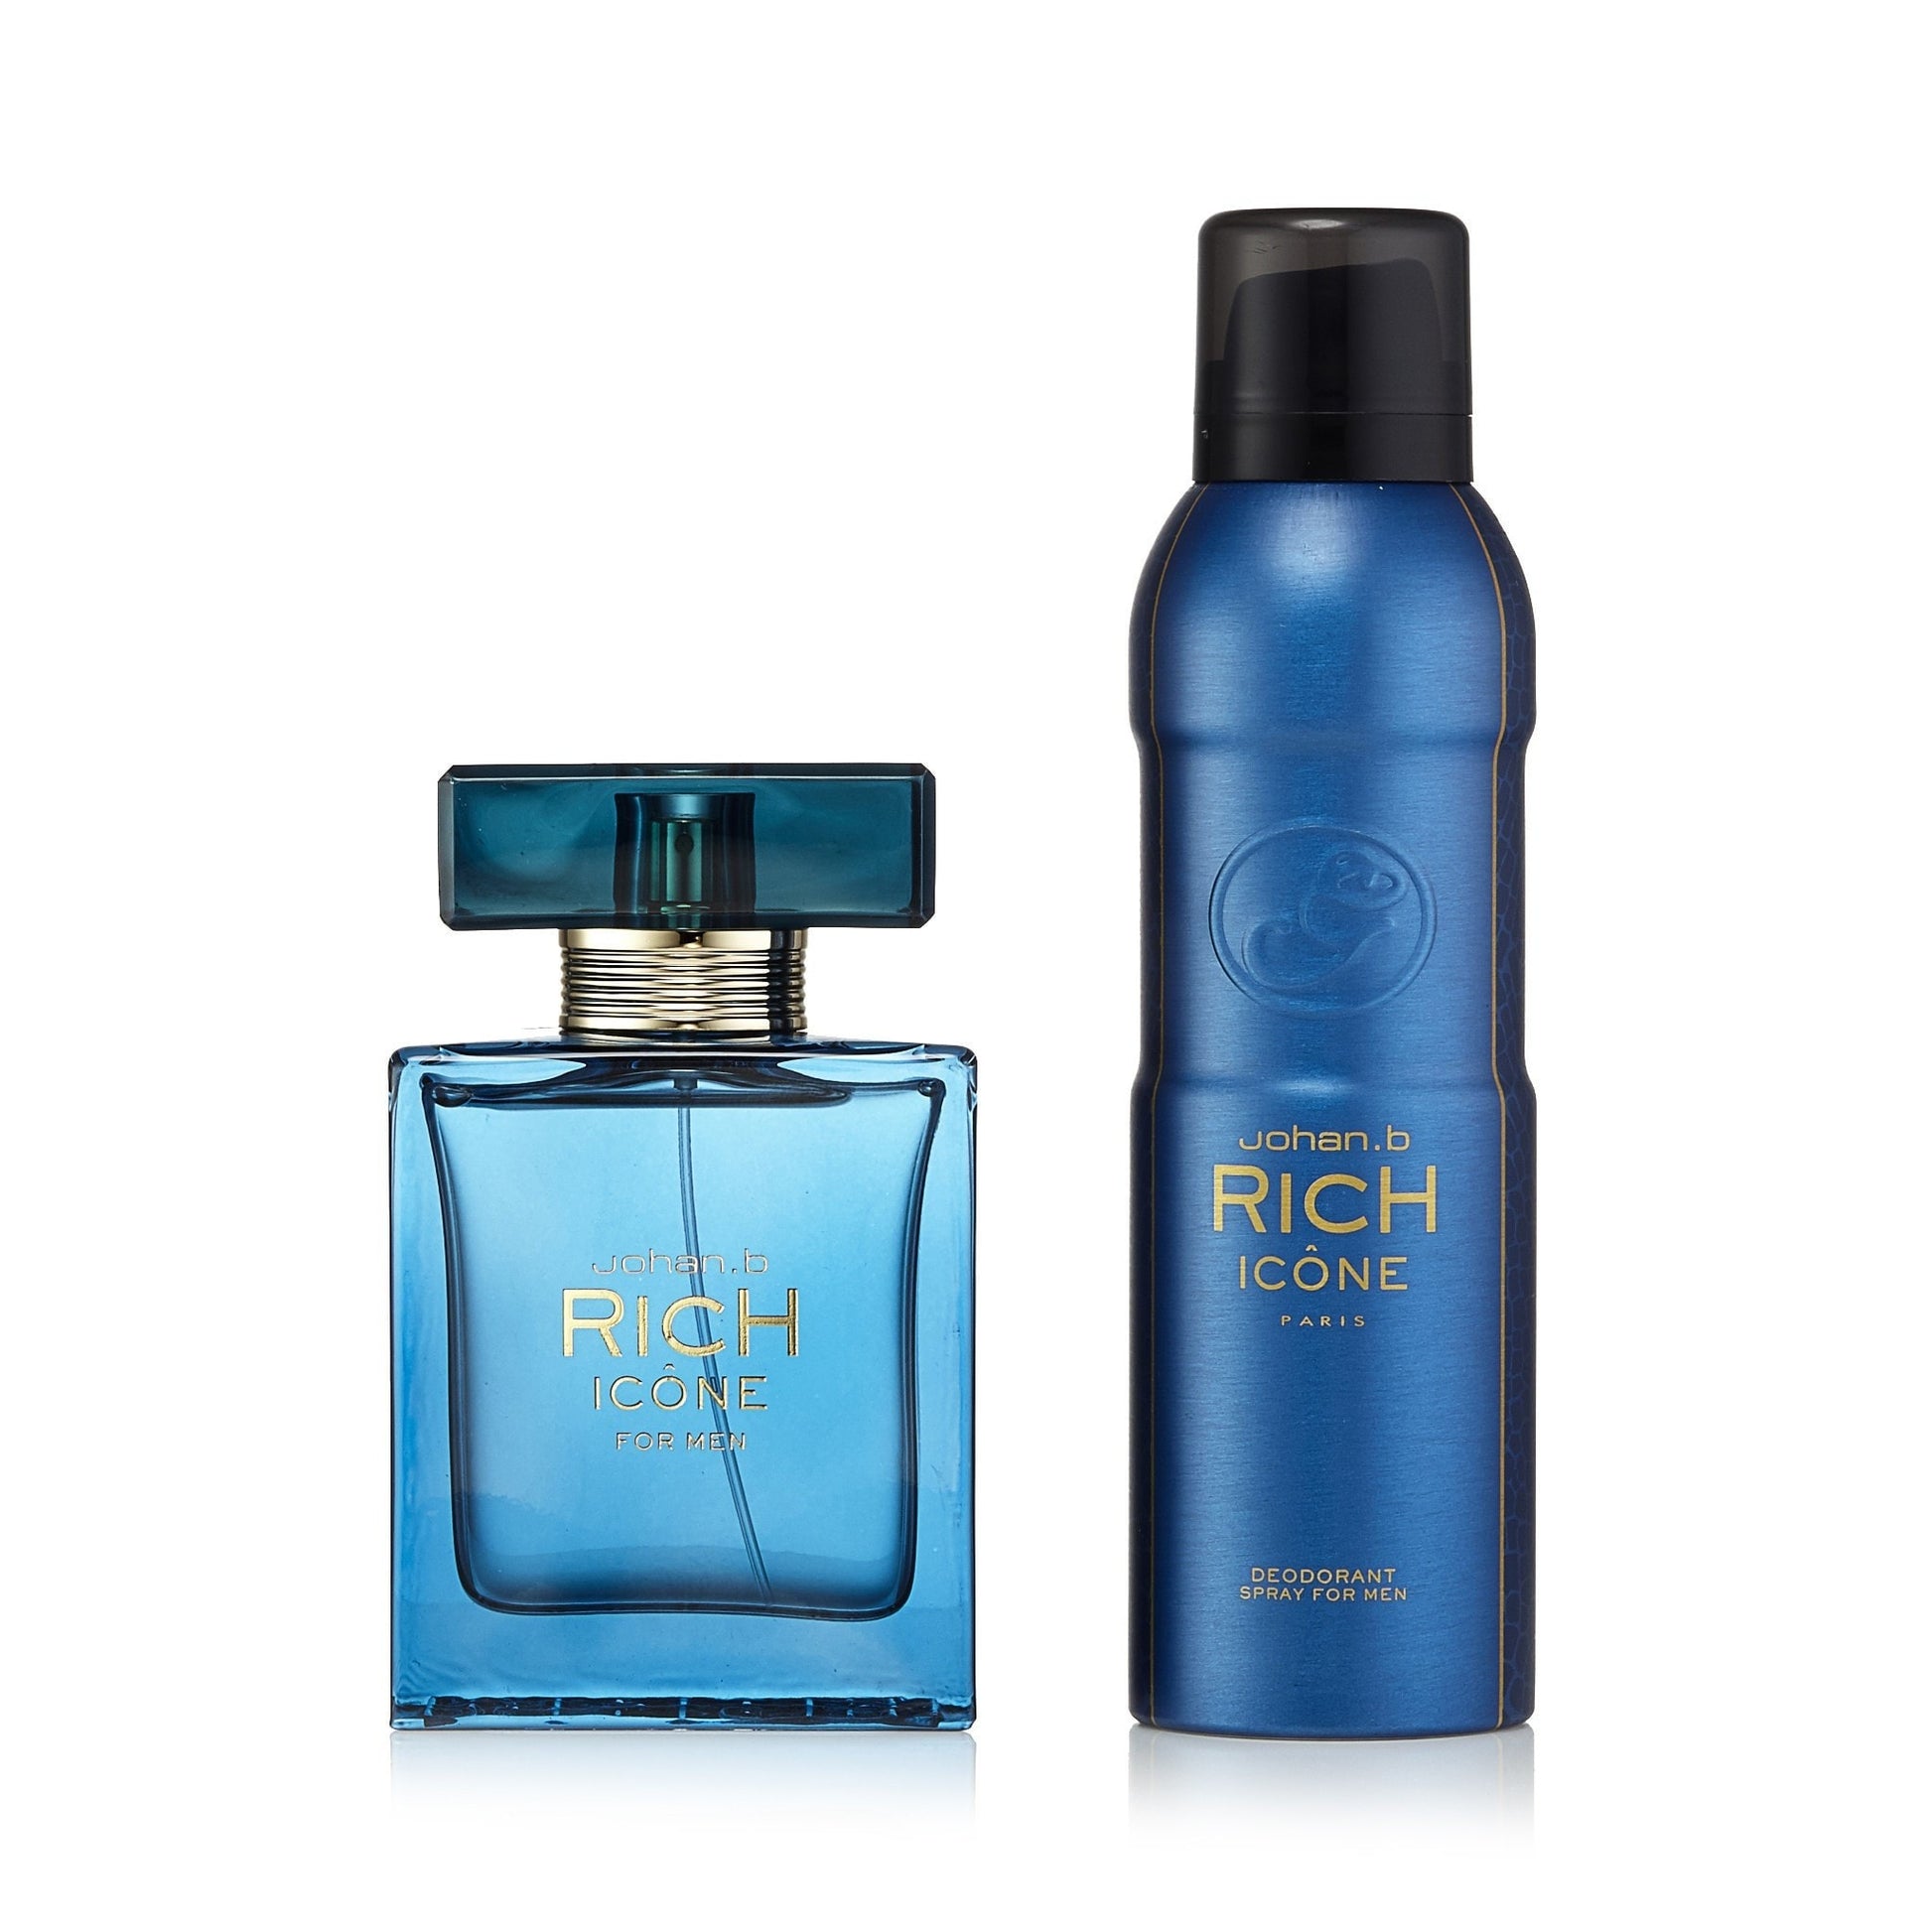 Rich Icone Gift Set for Men 3.0 oz. Click to open in modal